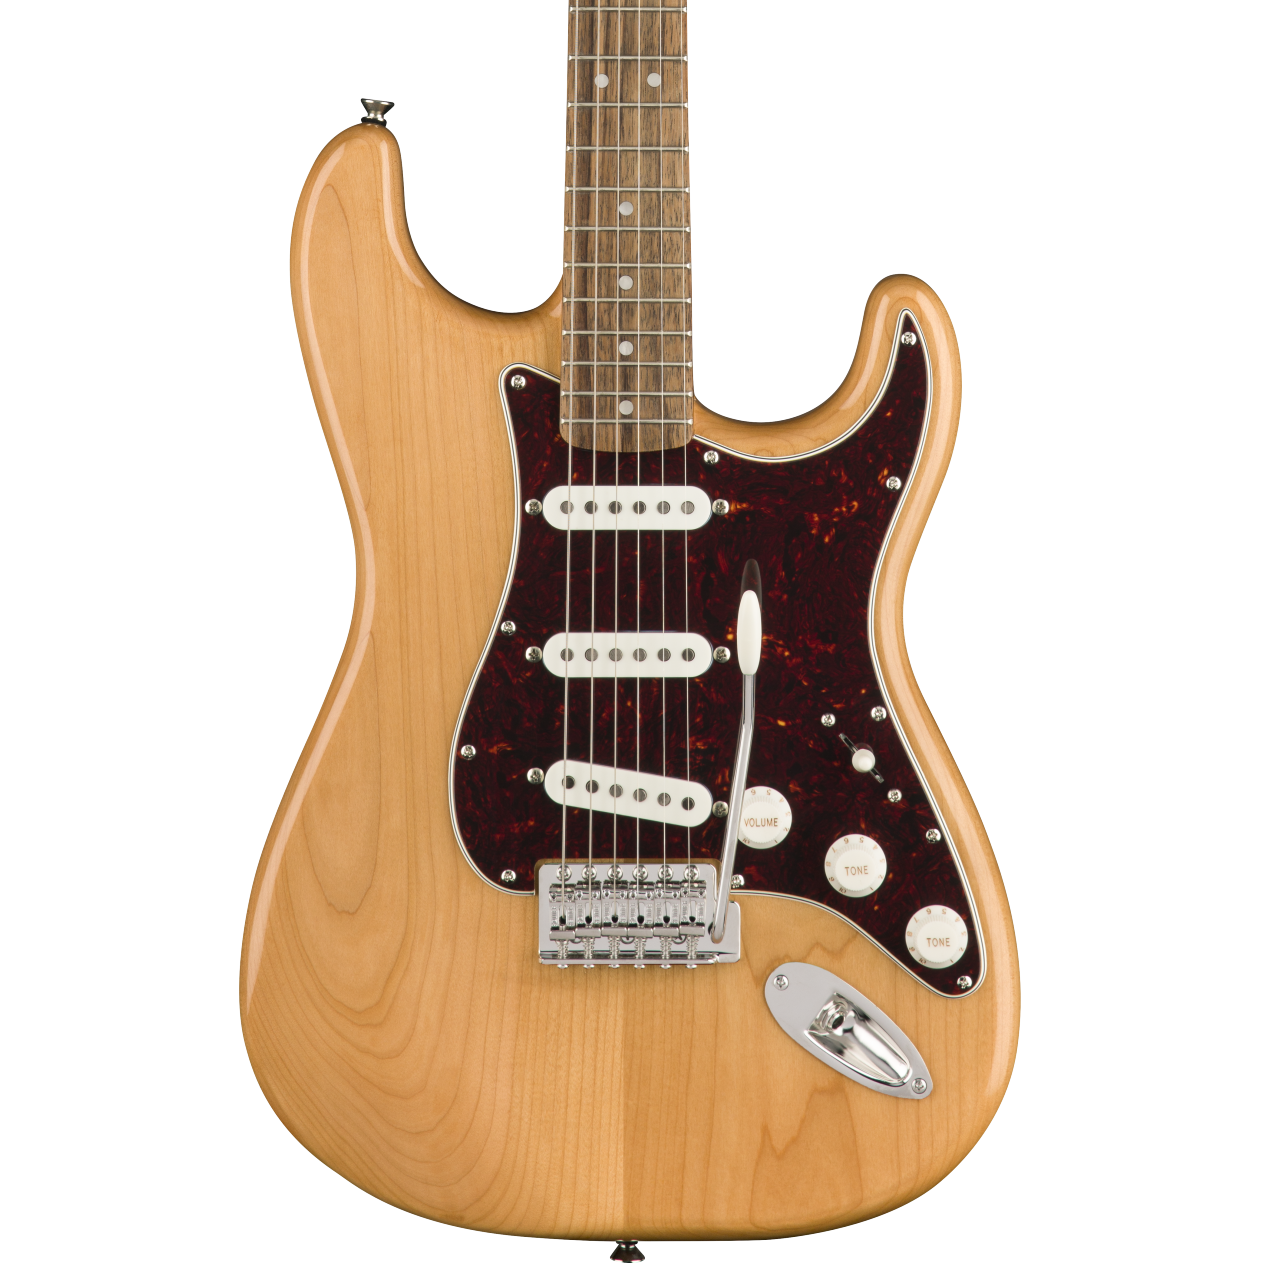 Squier by Fender Classic Vibe 70's Stratocaster Guitar - Laurel - Natural